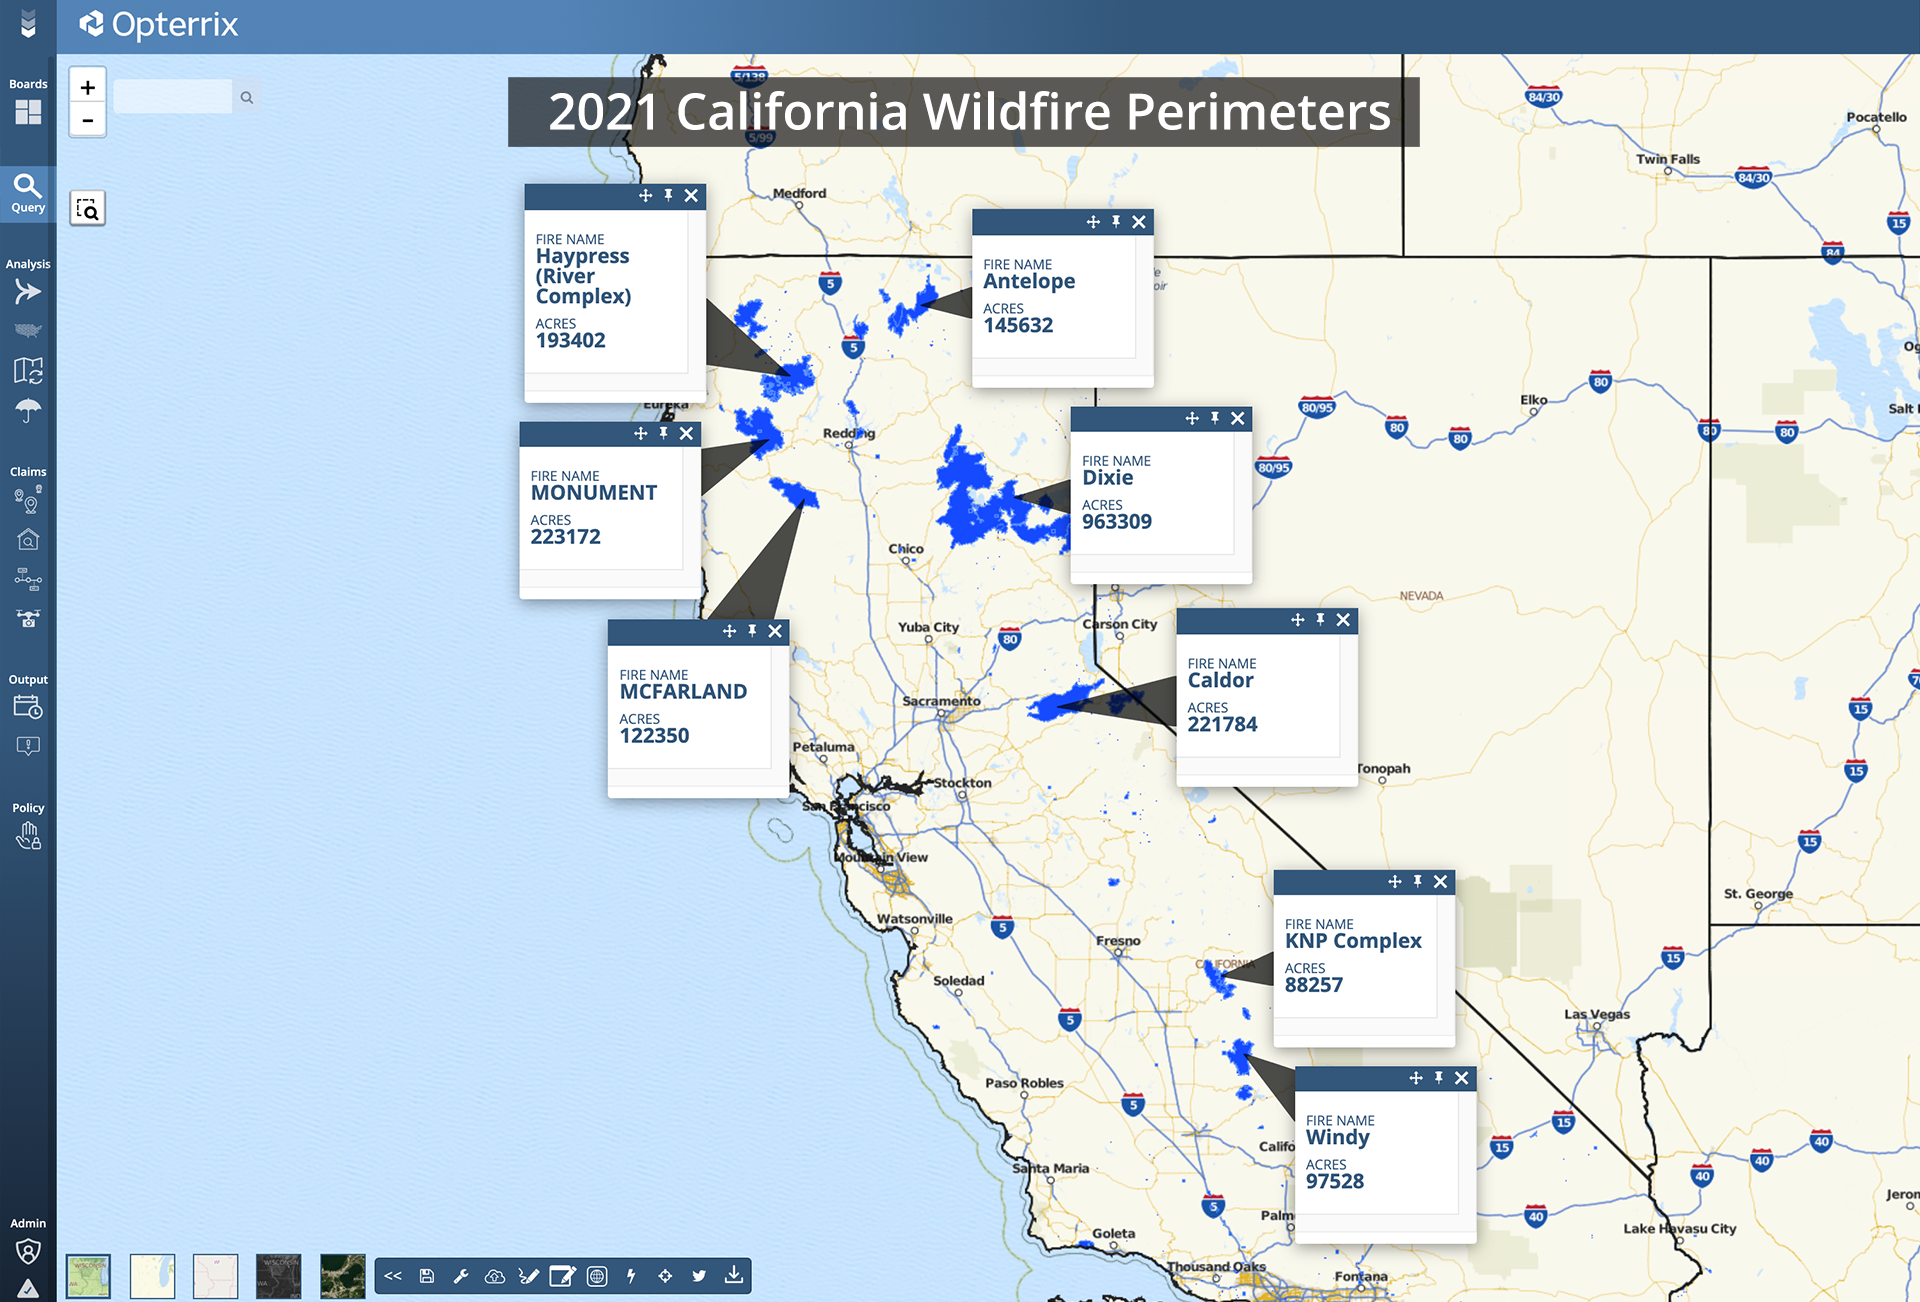 GIS Day – A Geospatial Analysis of 2021 California Wildfires